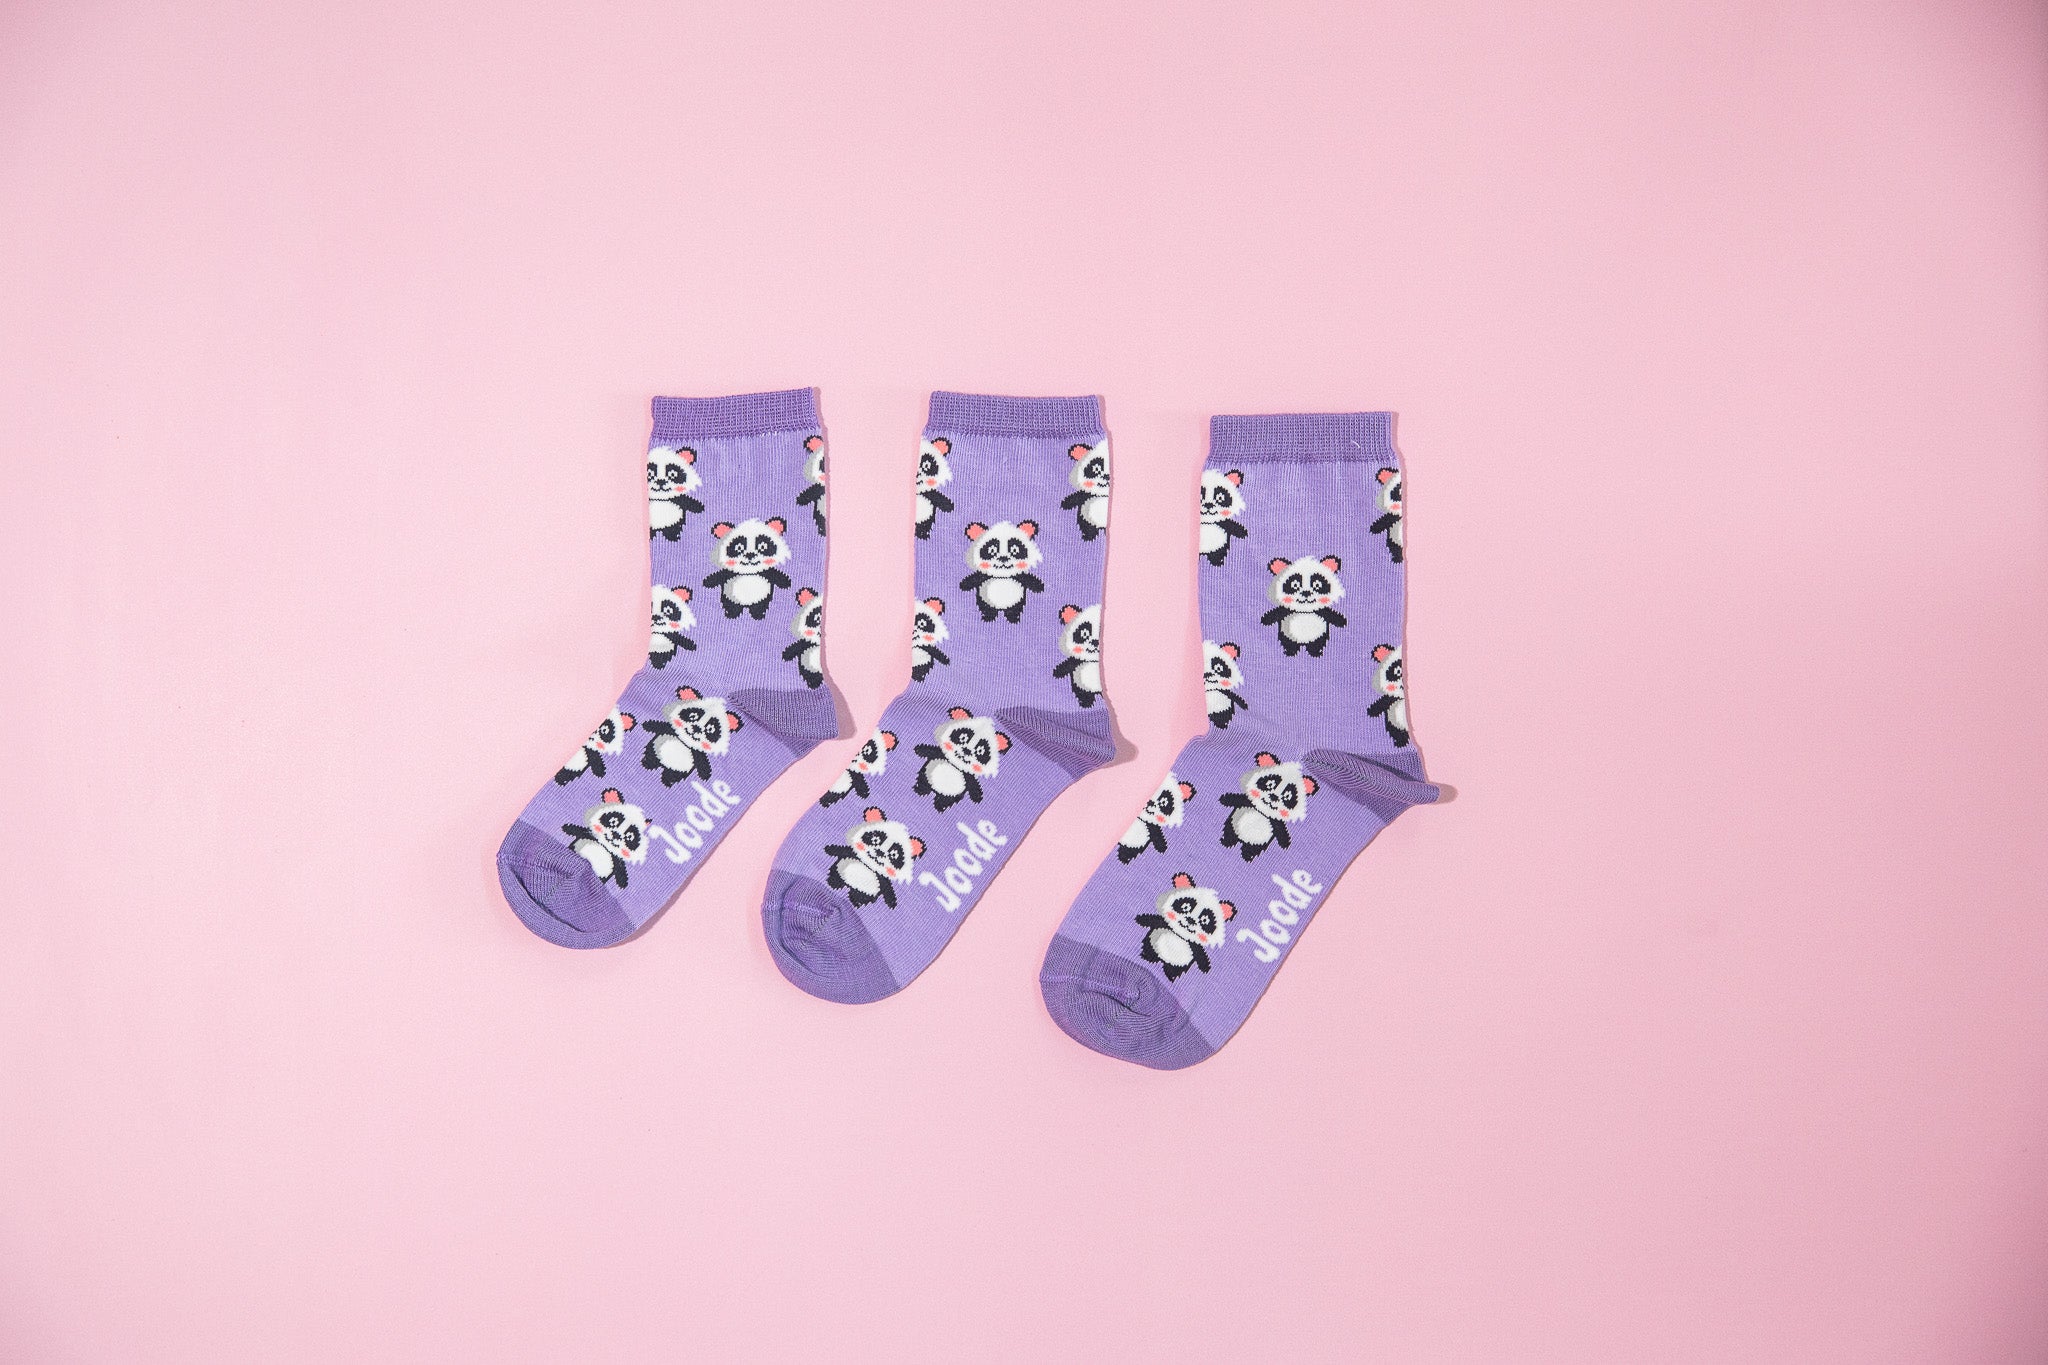 Matching Socks for Couples, Kids, Groomsmen & the Whole Family